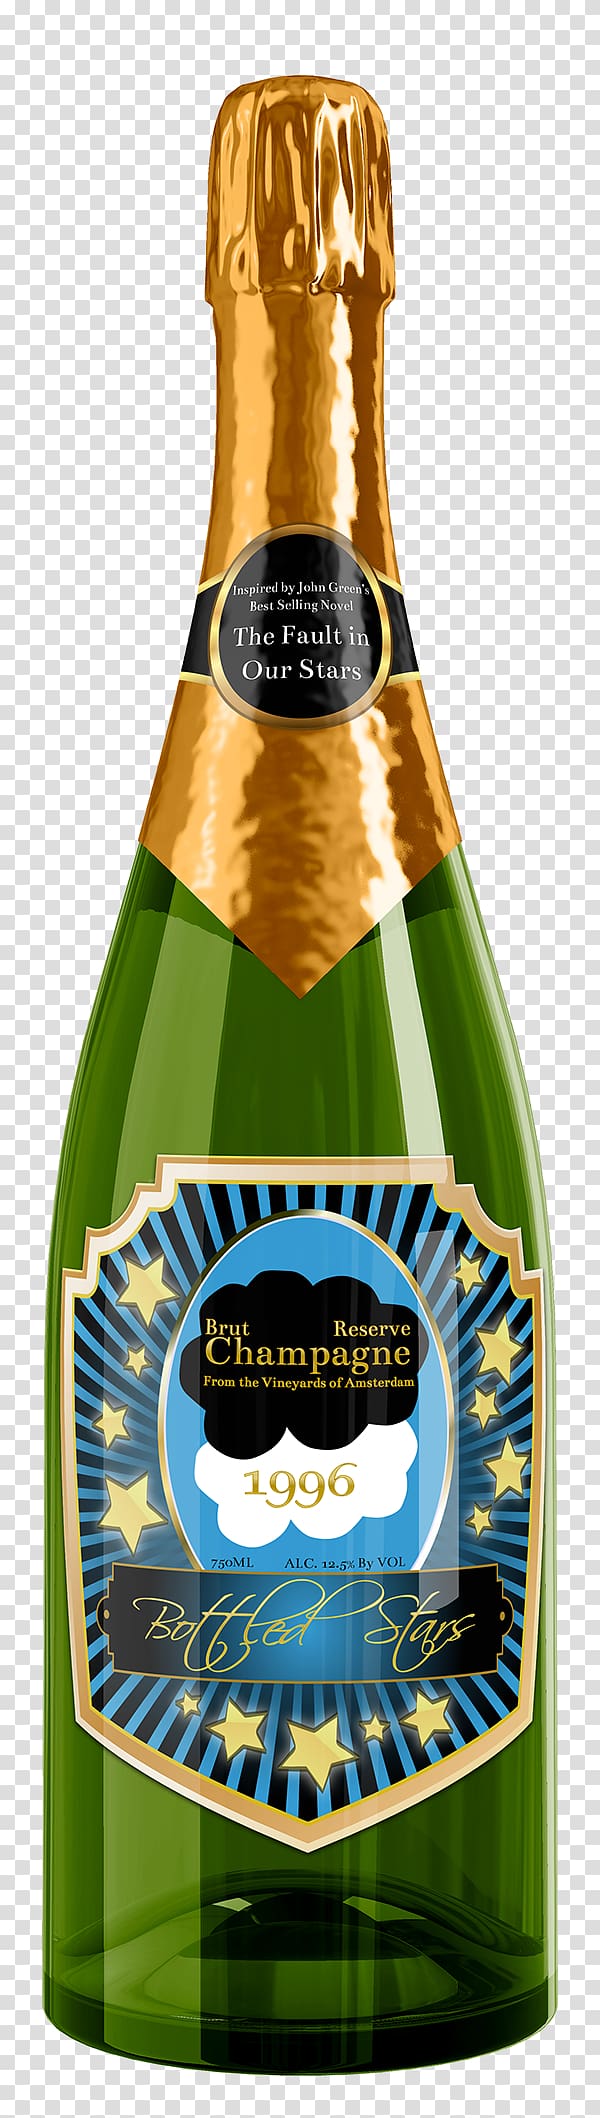 Champagne Beer bottle Wine The Fault in Our Stars, champagne transparent background PNG clipart